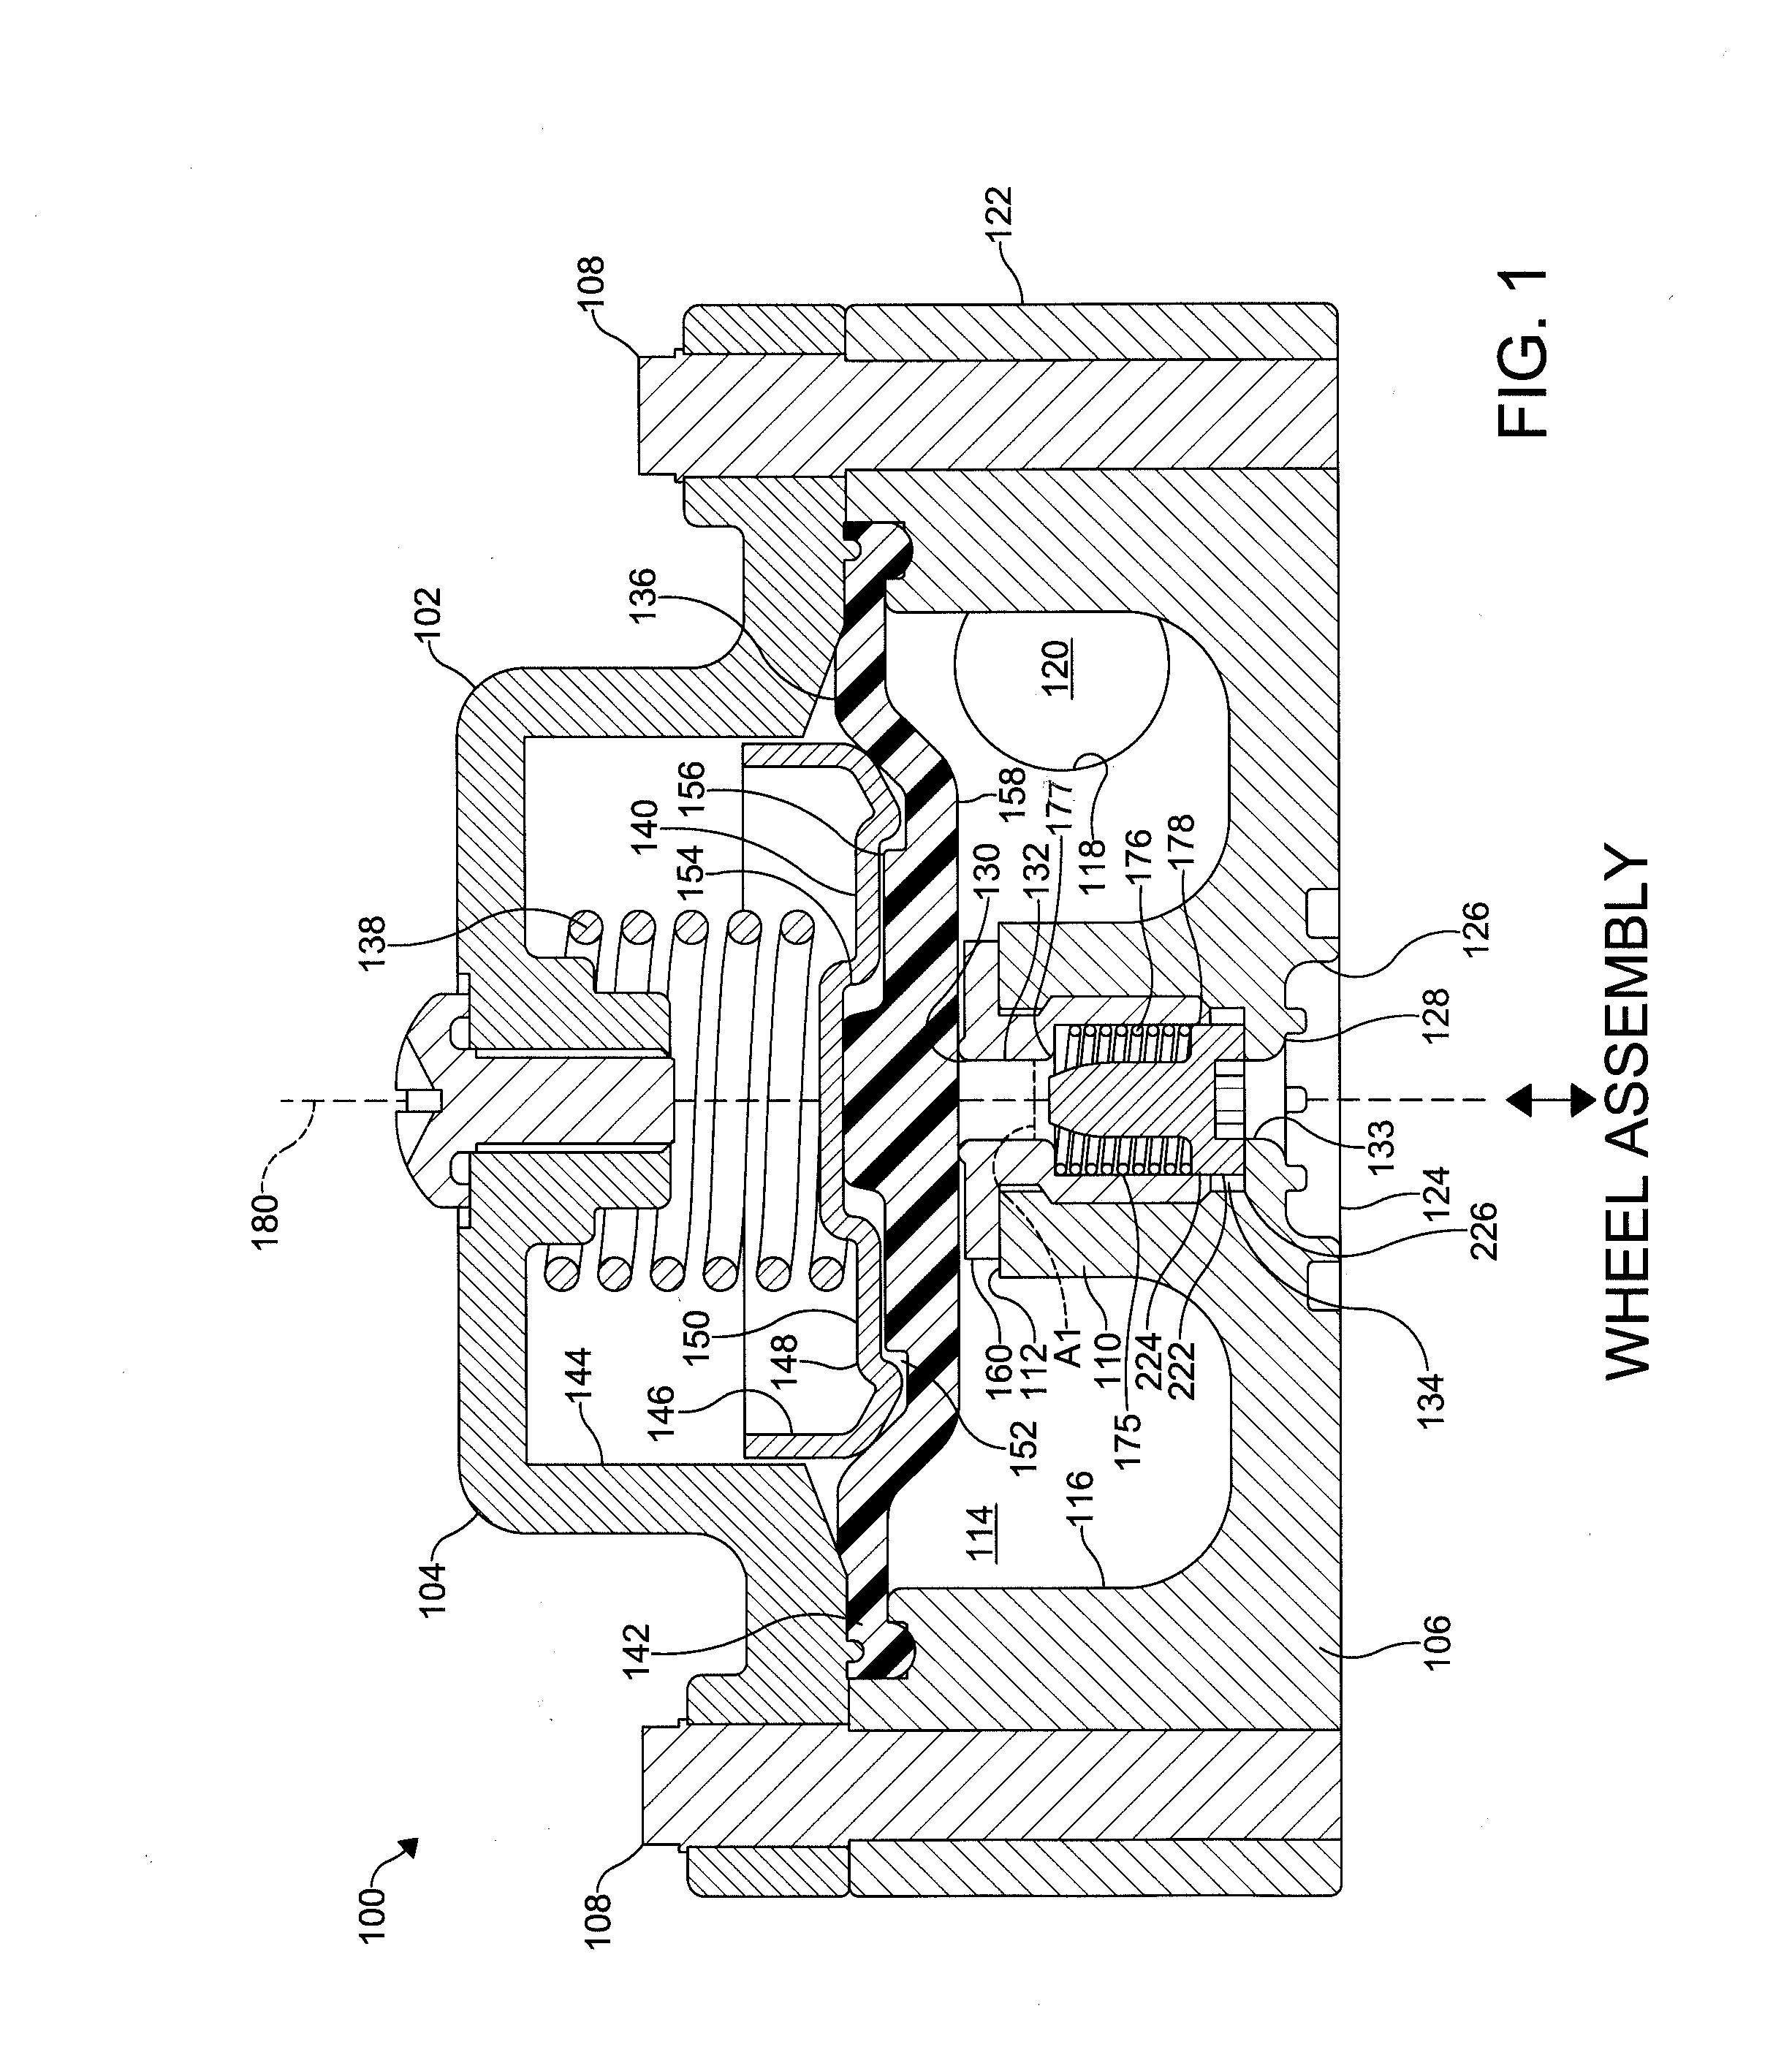 Valve assembly for a central tire inflation system